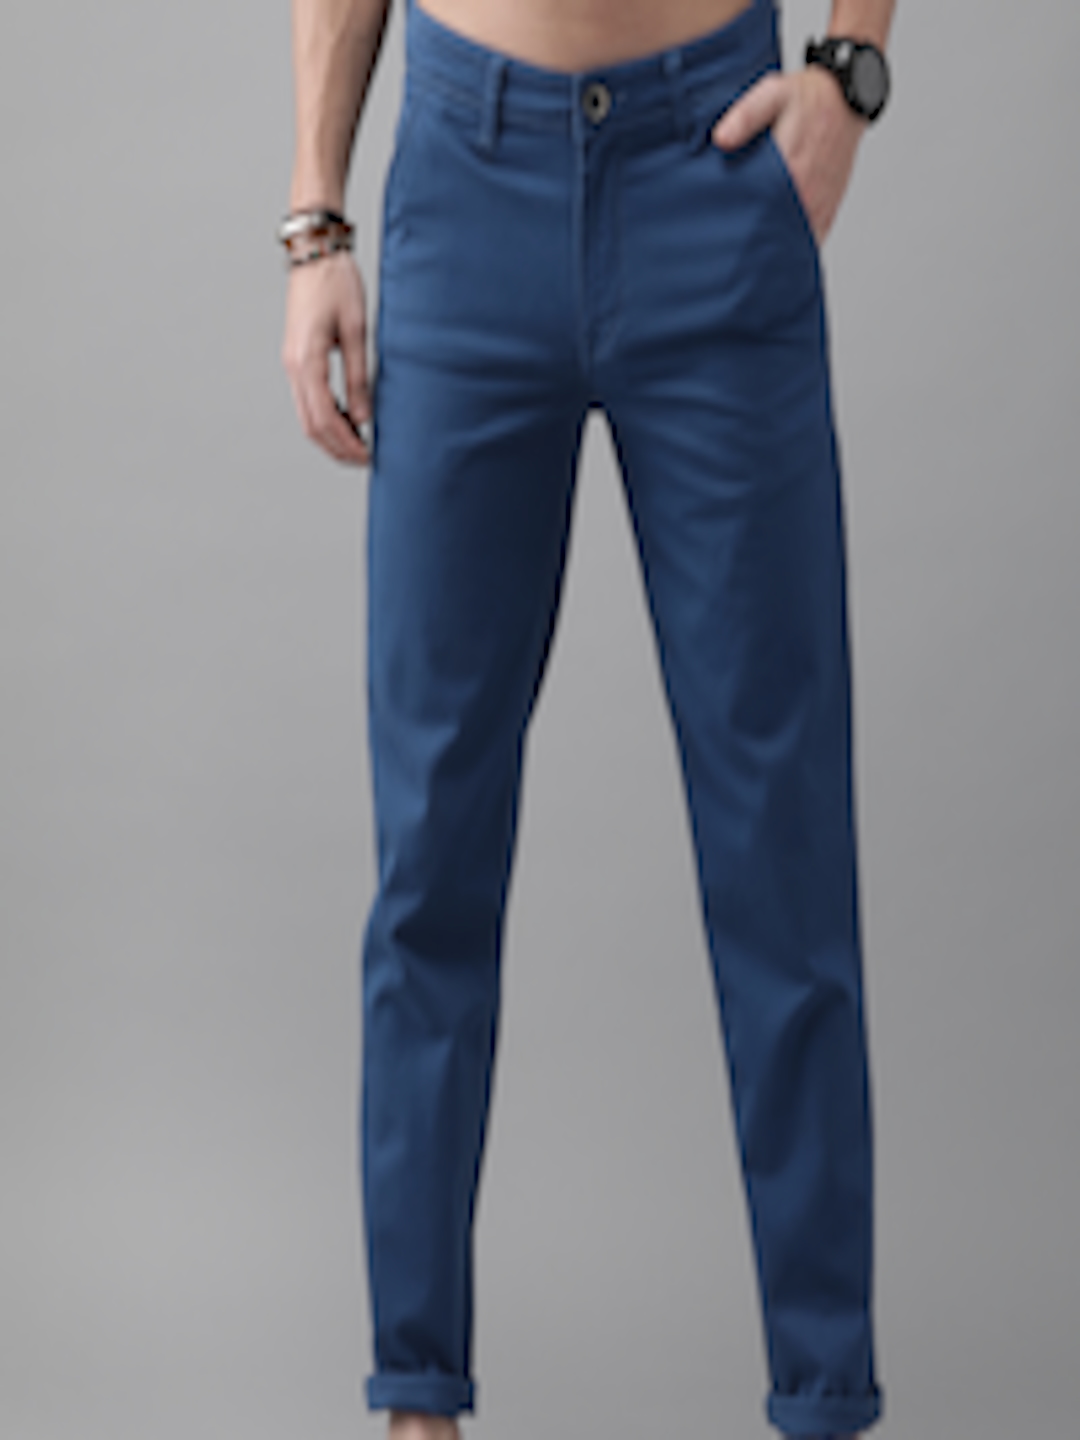 Buy The Roadster Lifestyle Co Men Blue Regular Fit Solid Chinos ...